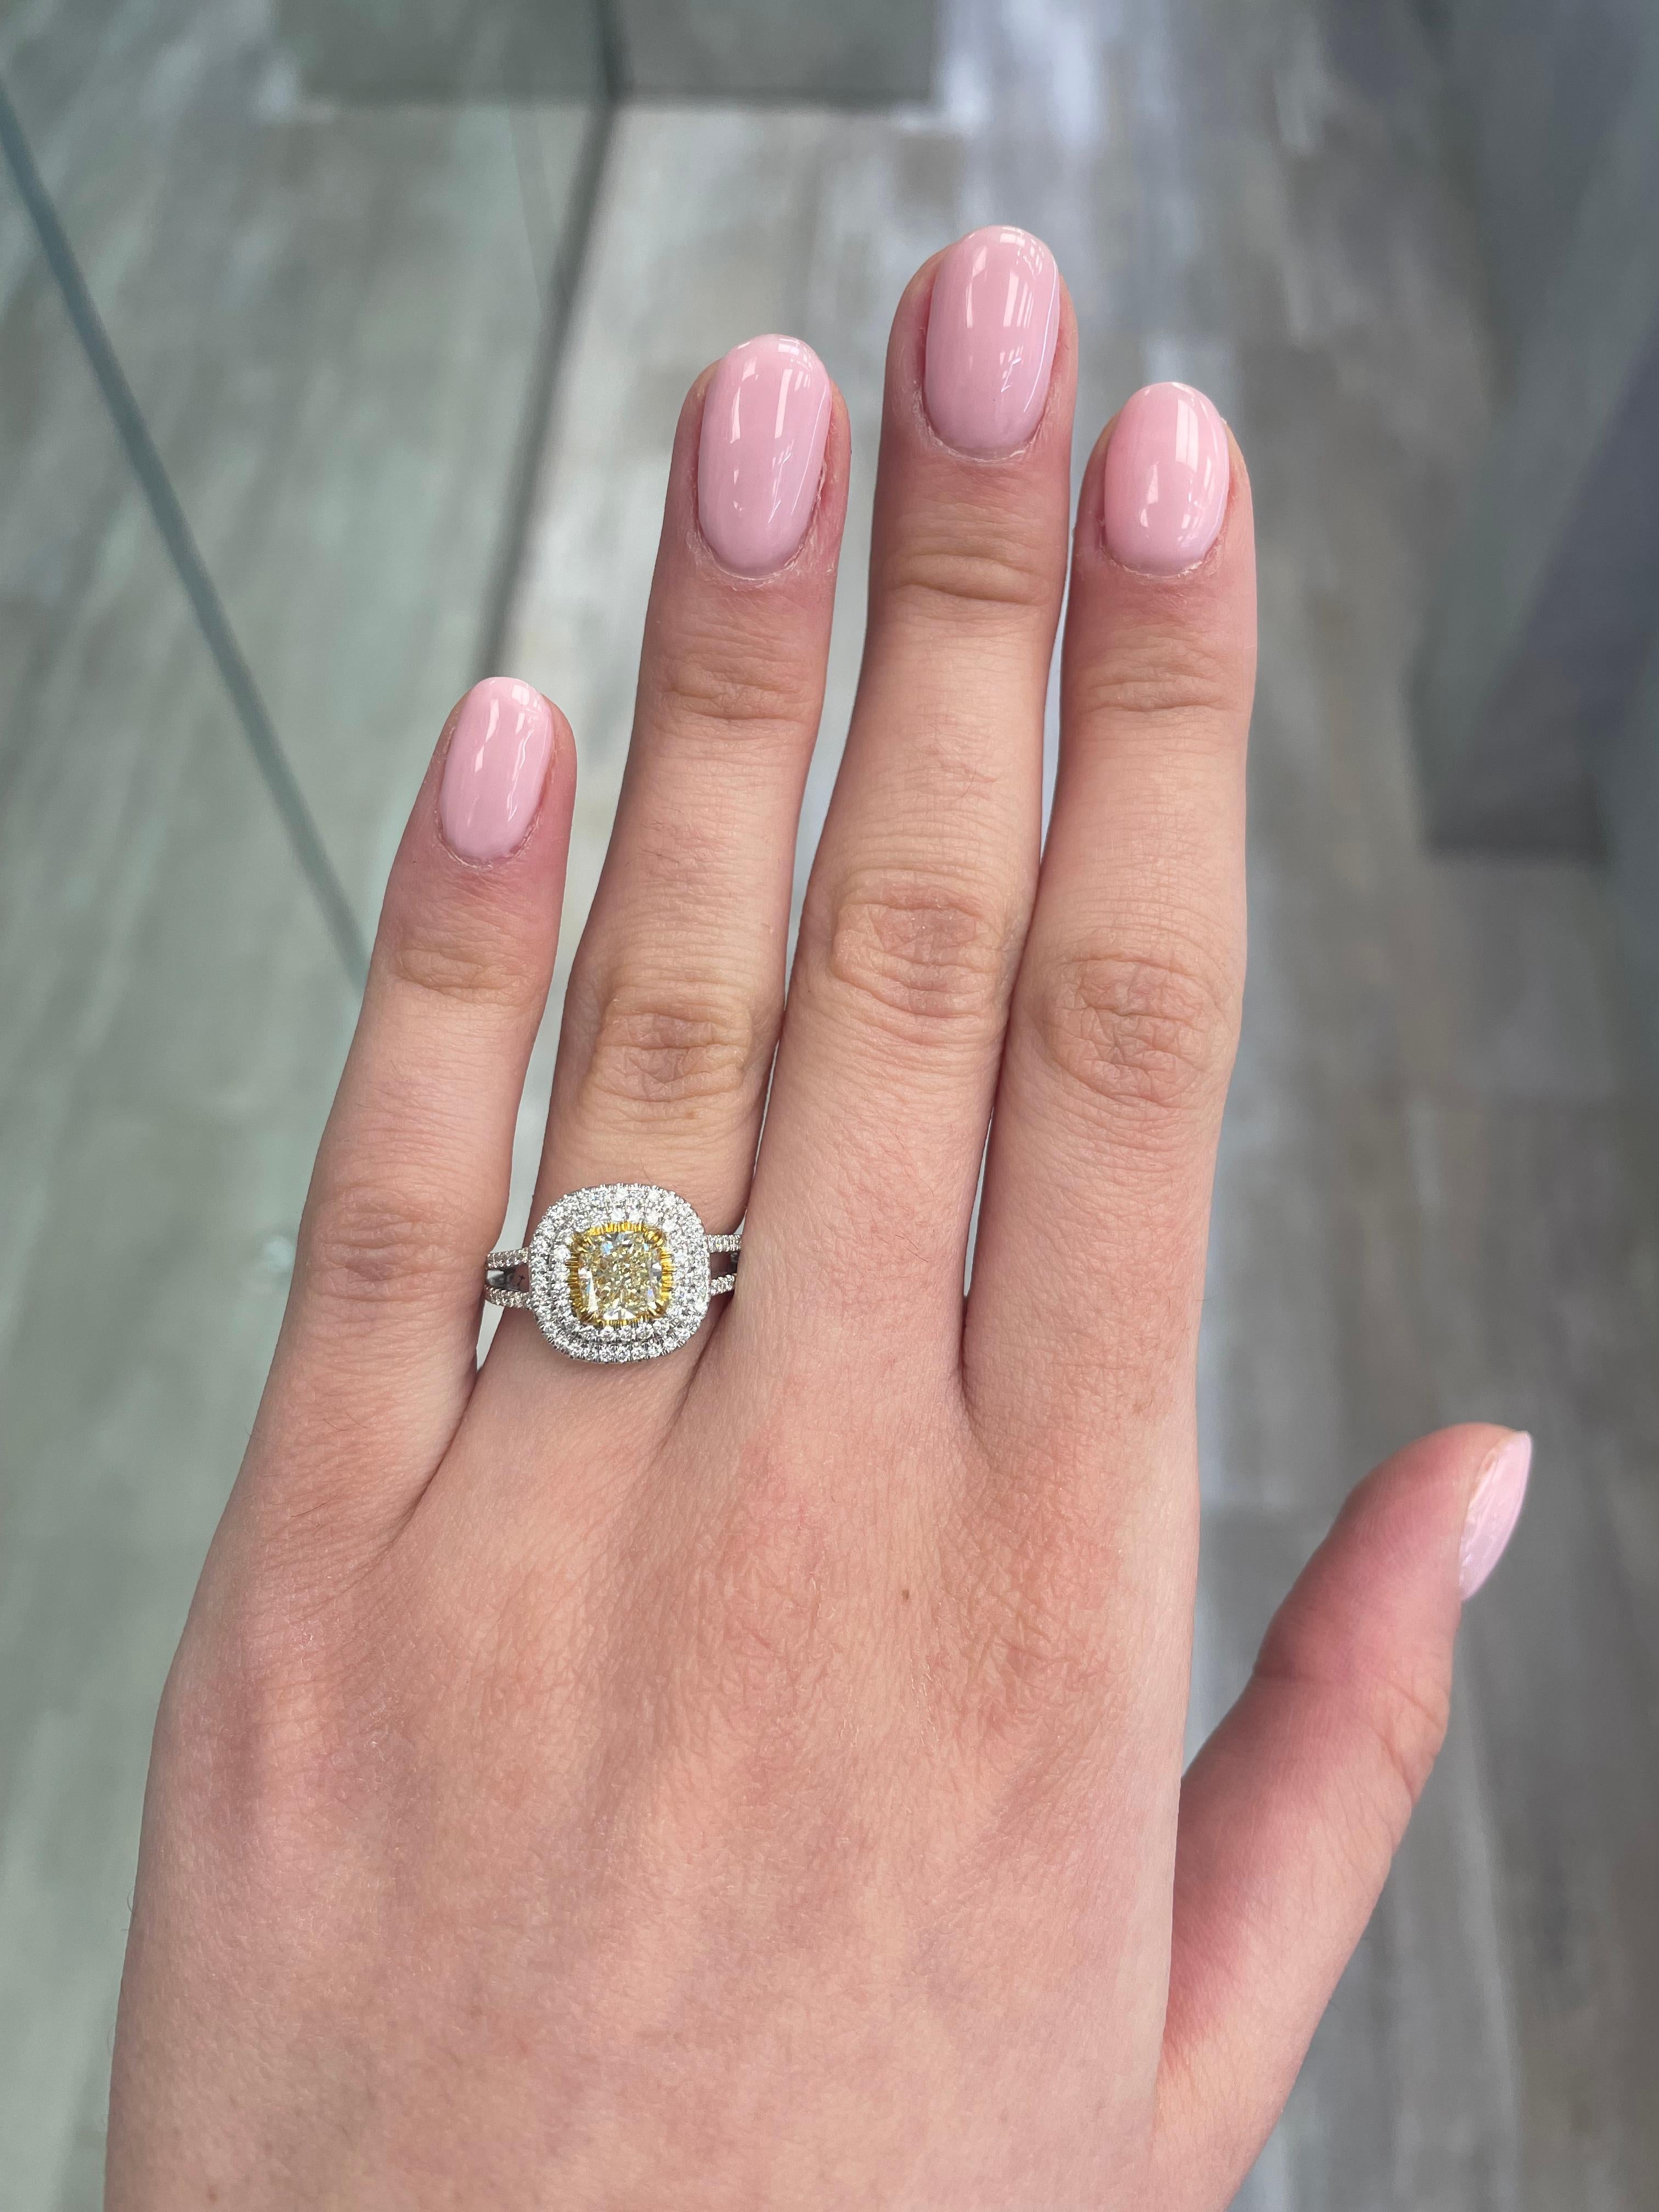 Stunning modern EGL certified yellow diamond double halo ring, two-tone 18k yellow and white gold, split shank. By Alexander Beverly Hills
1.58 carats total diamond weight.
1.06 carat cushion cut Fancy Yellow color and VS2 clarity diamond, EGL